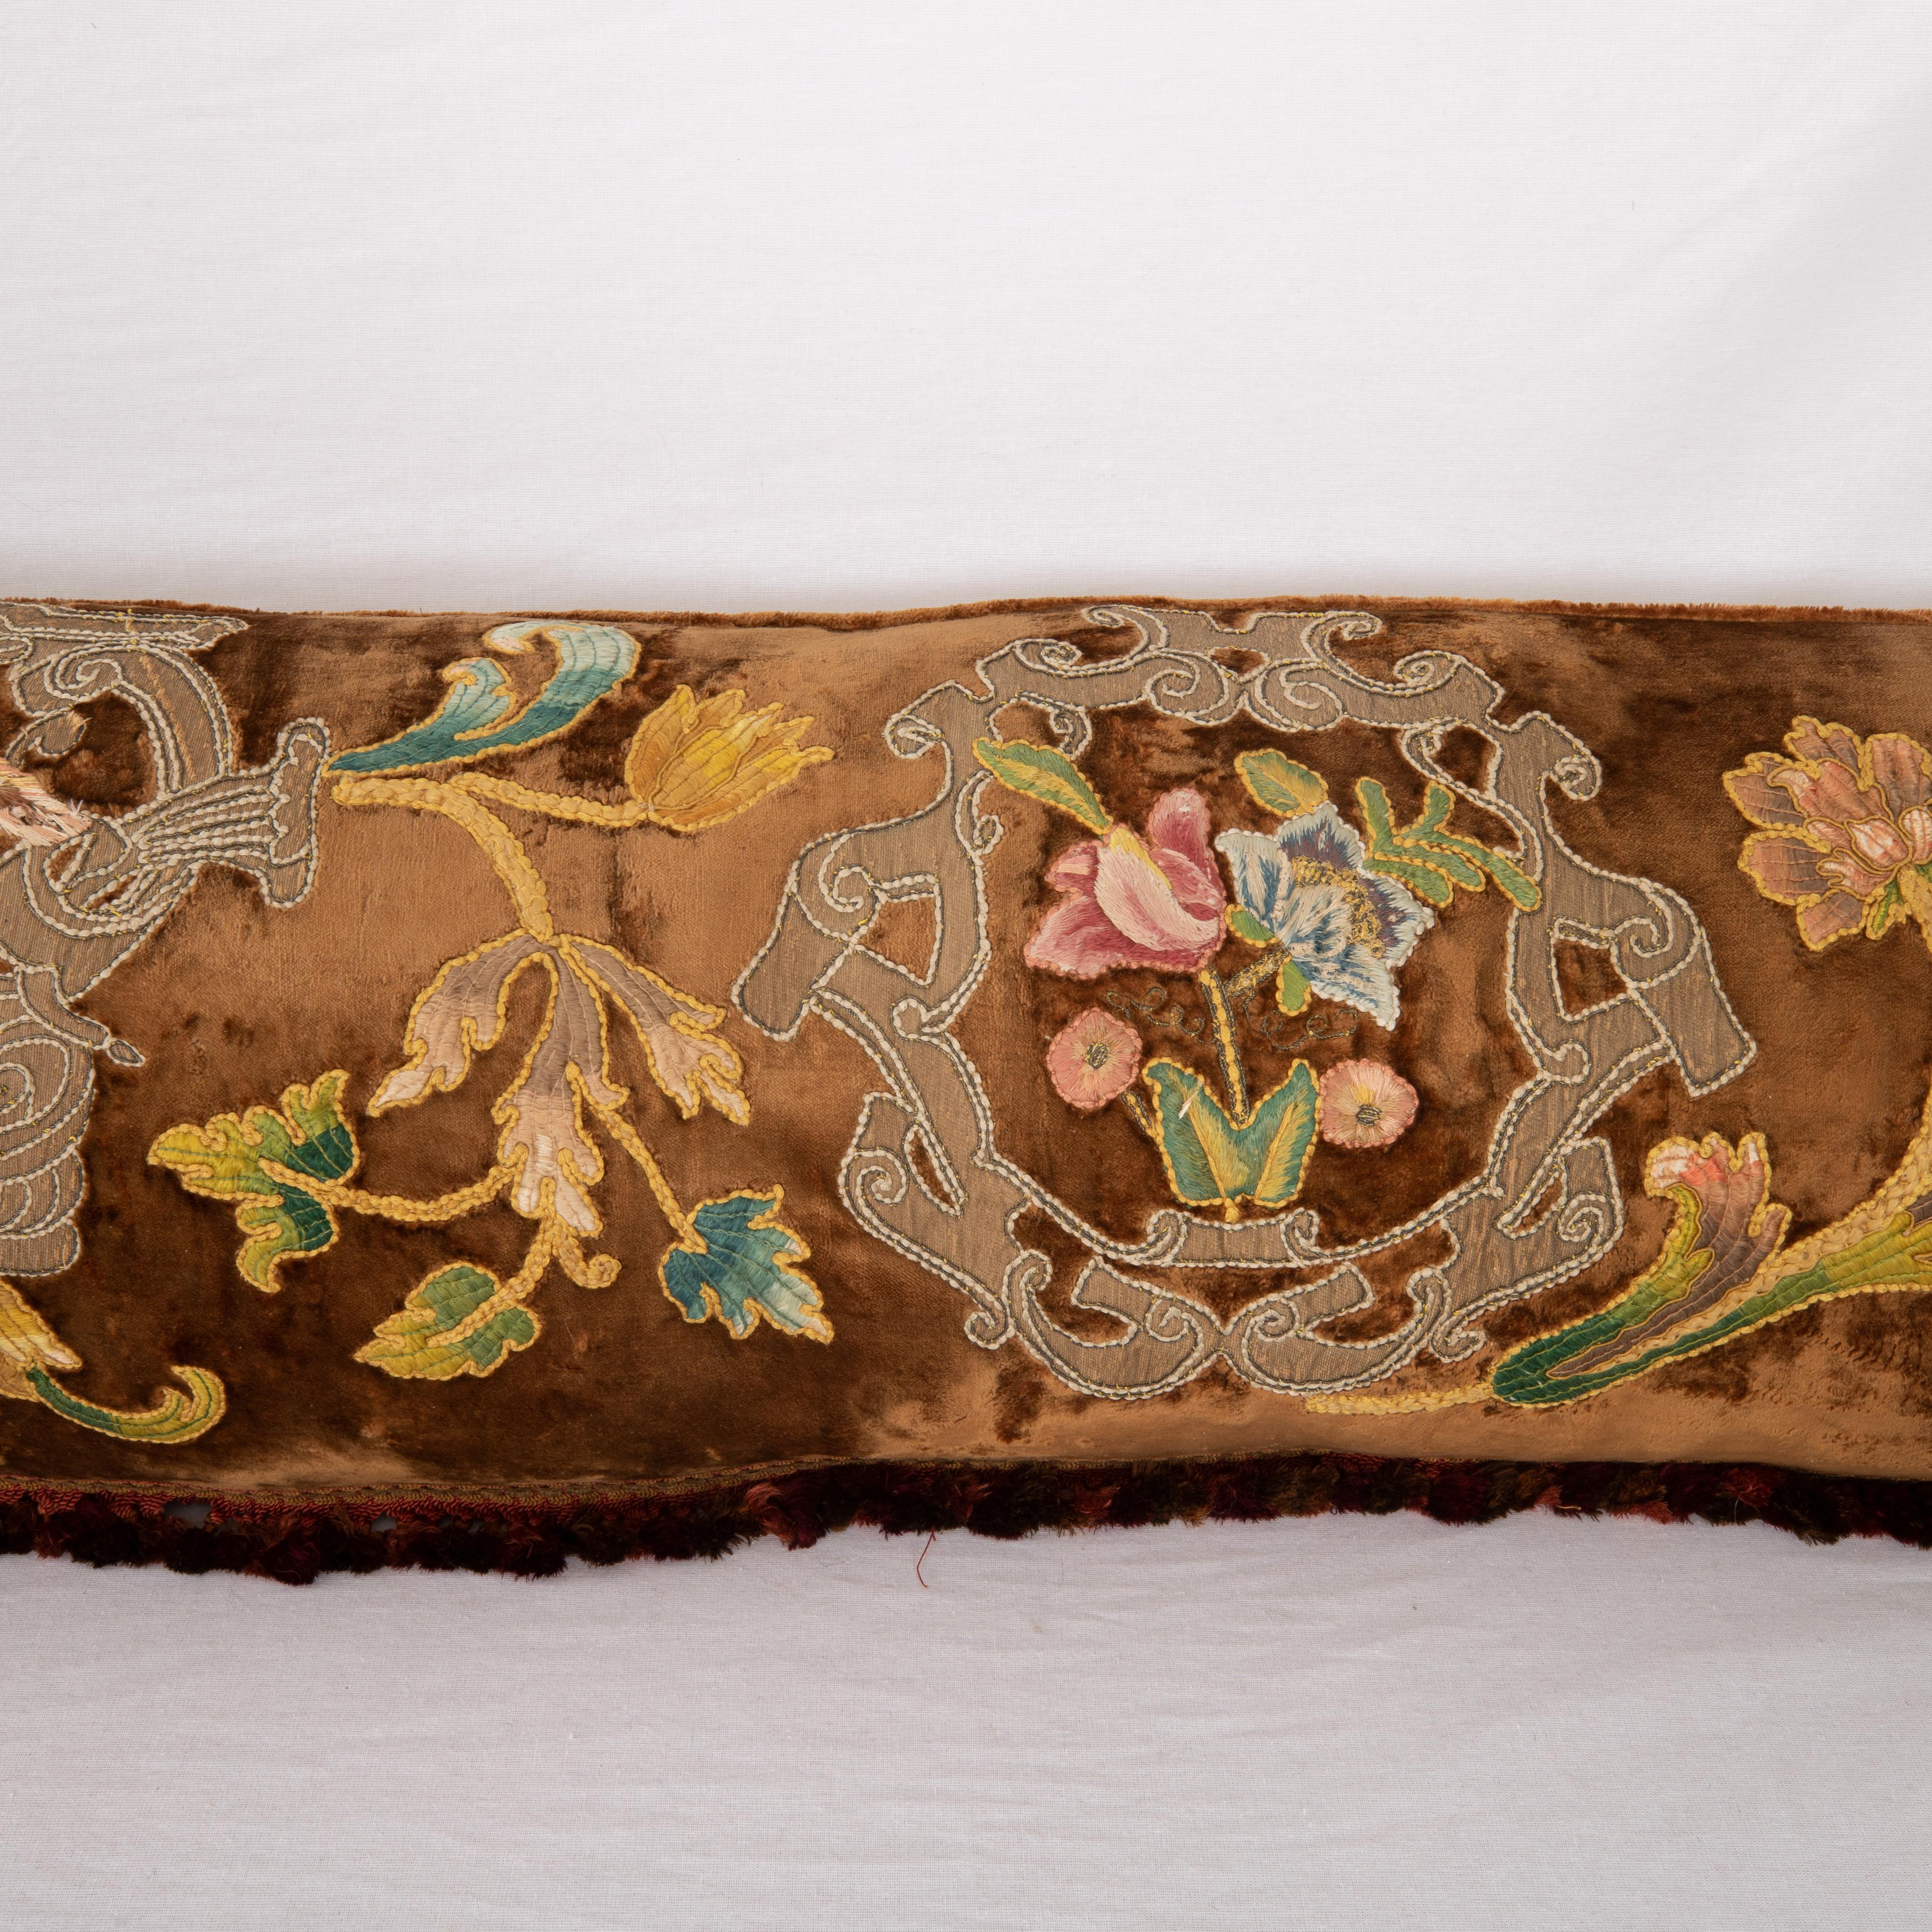 19th Century Super Long Body Pillow Cover made from an antique embroidery on silk Velvet For Sale